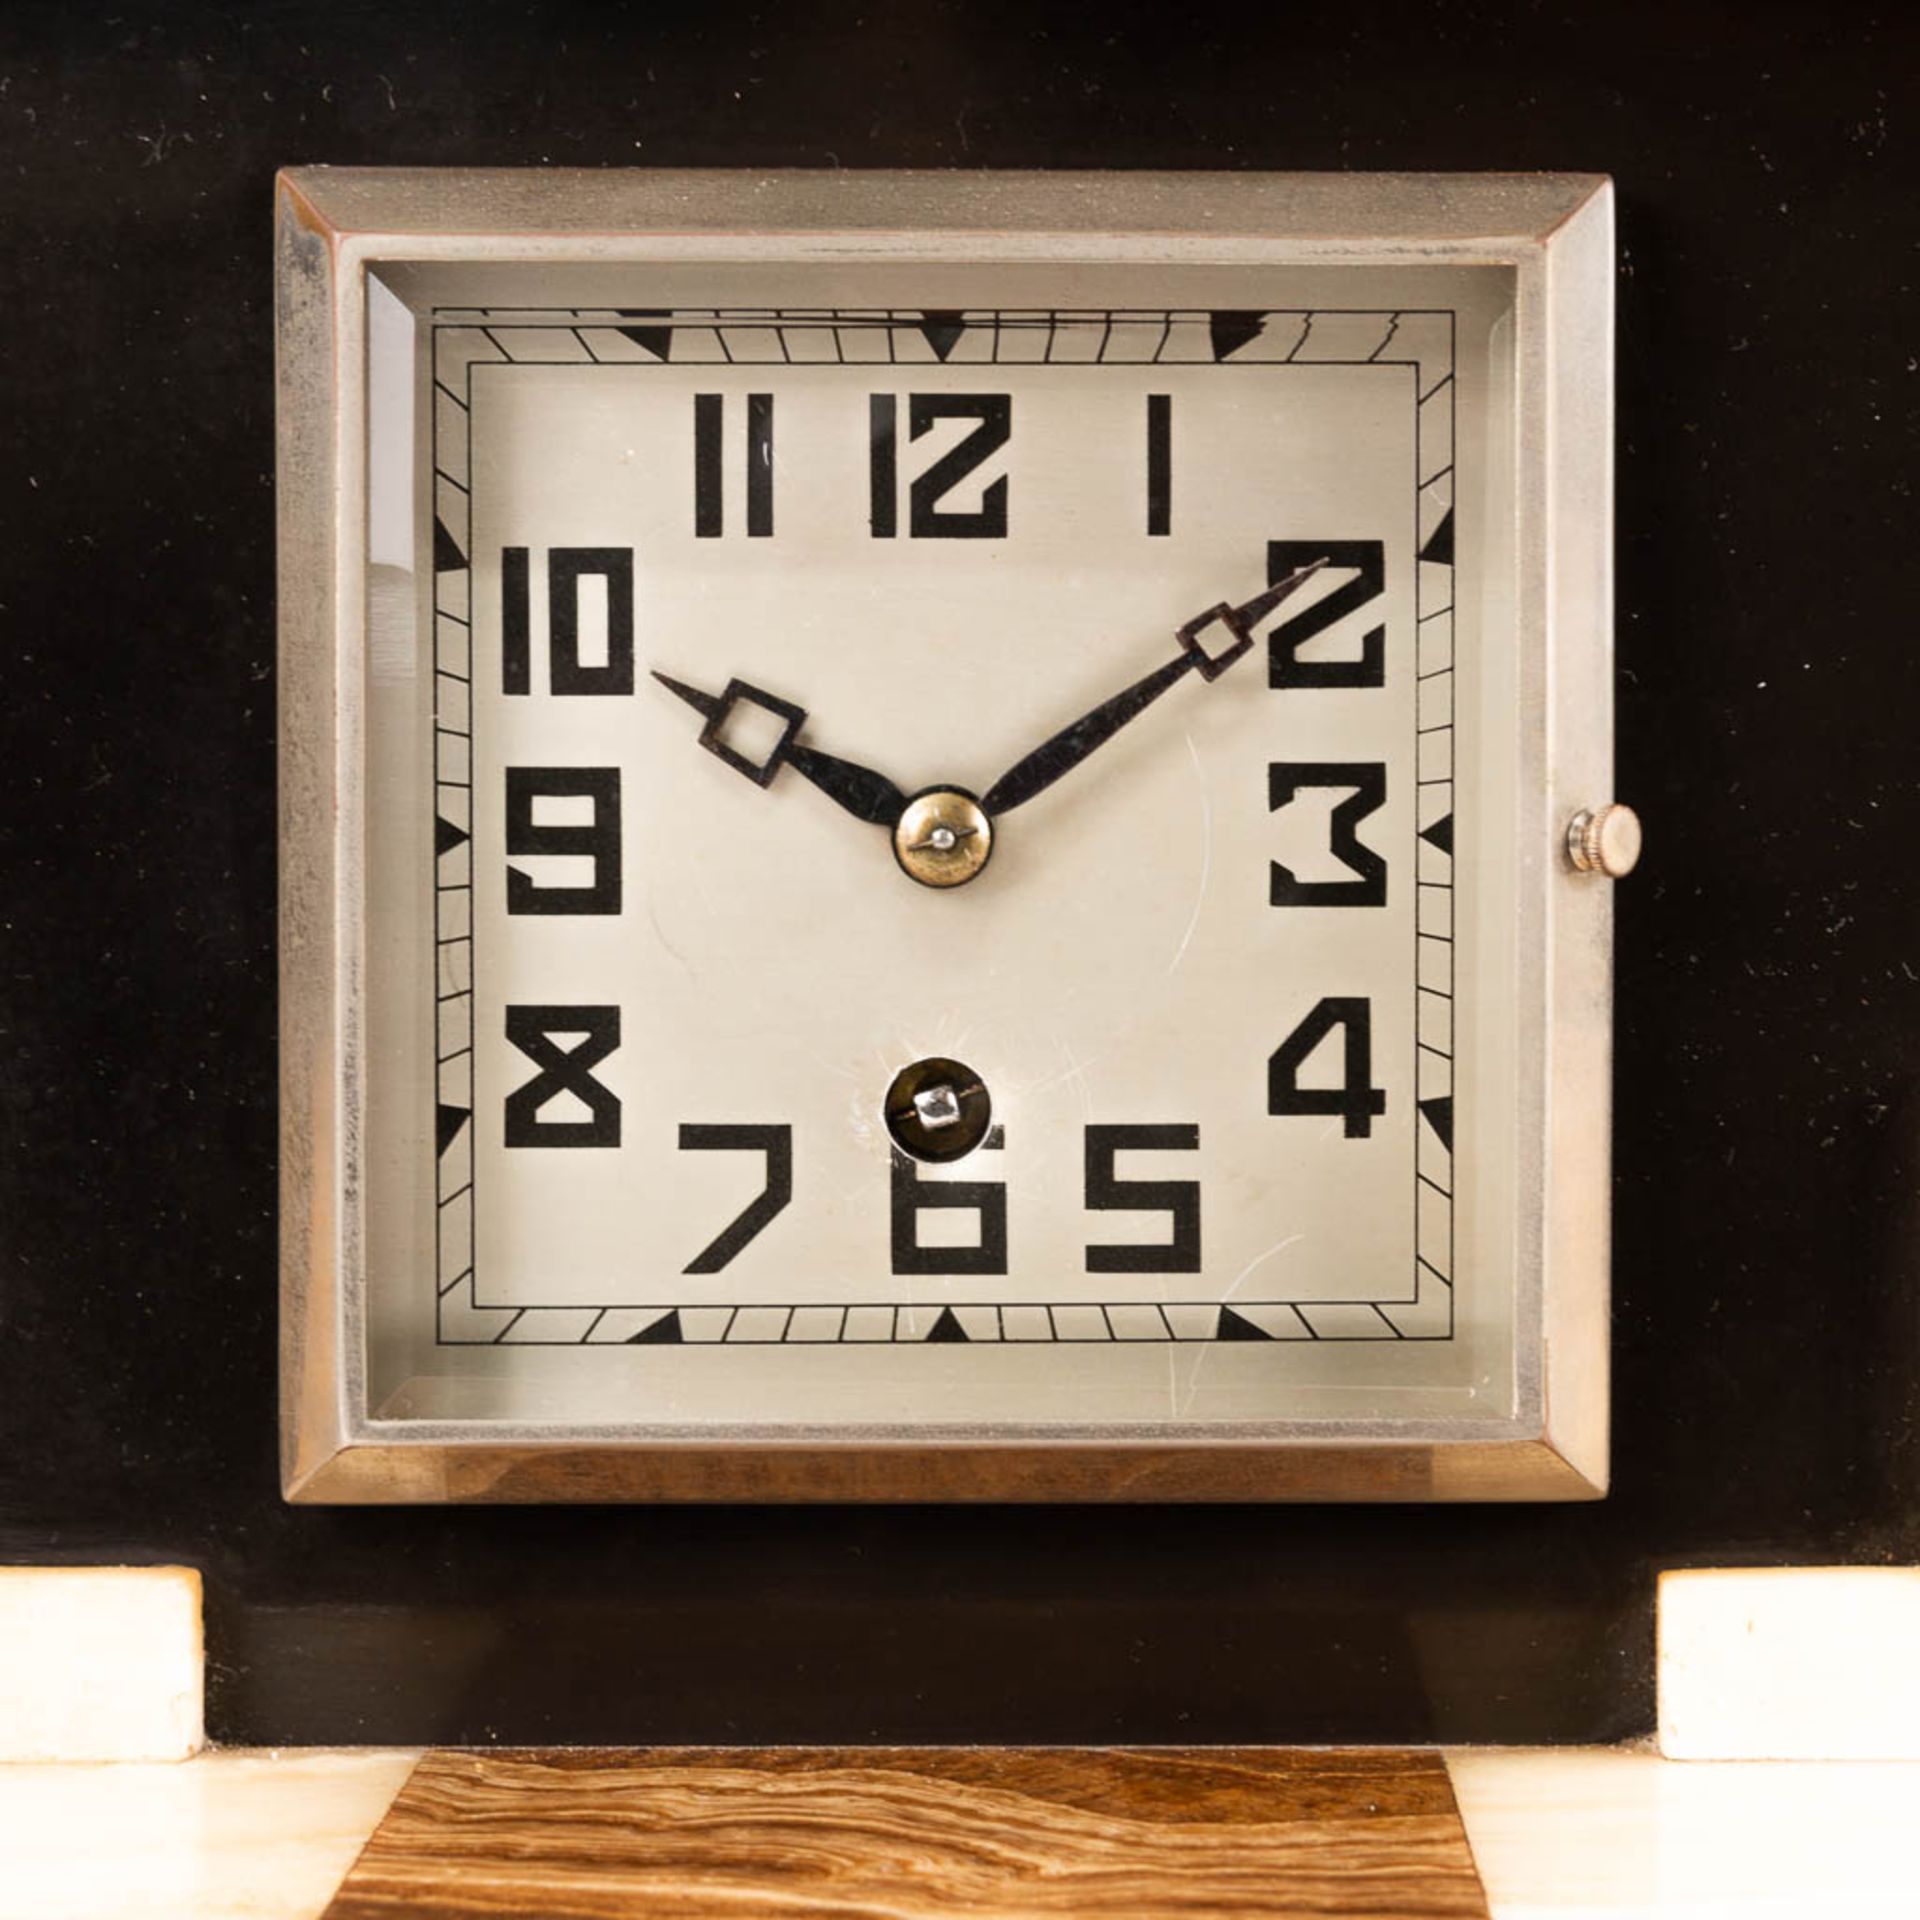 Enrique MOLINS-BALLESTE (1893-1958) A clock made of alabaster and onyx in Art Deco style, with a spe - Image 7 of 11